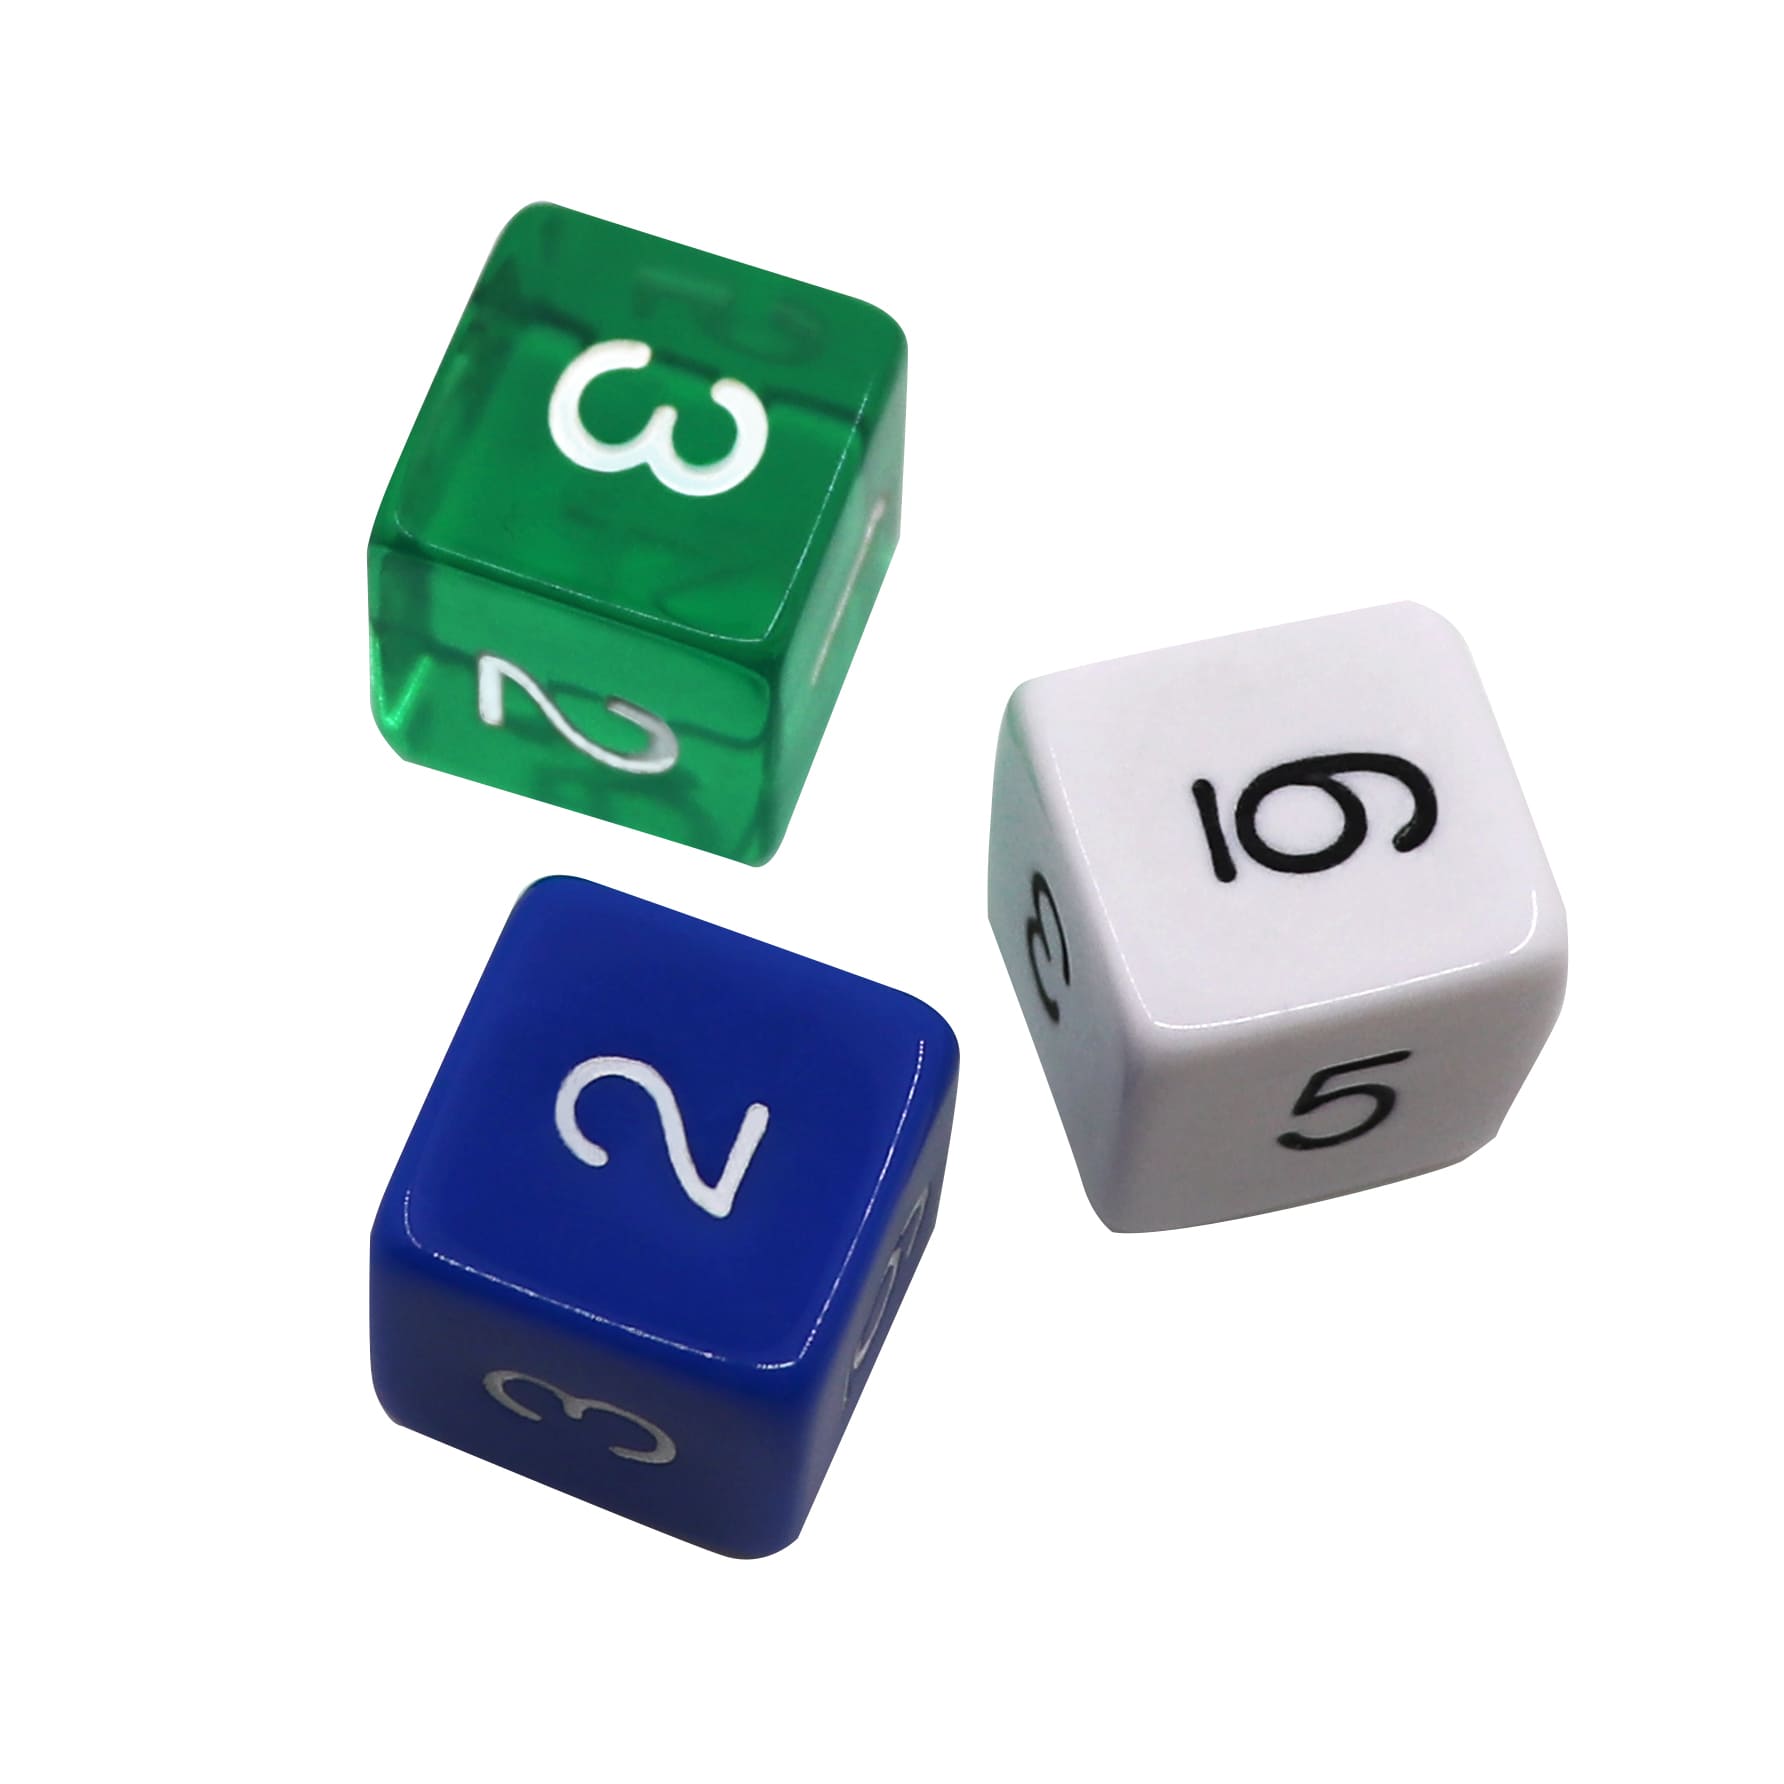 6-Sided Numbered Dice